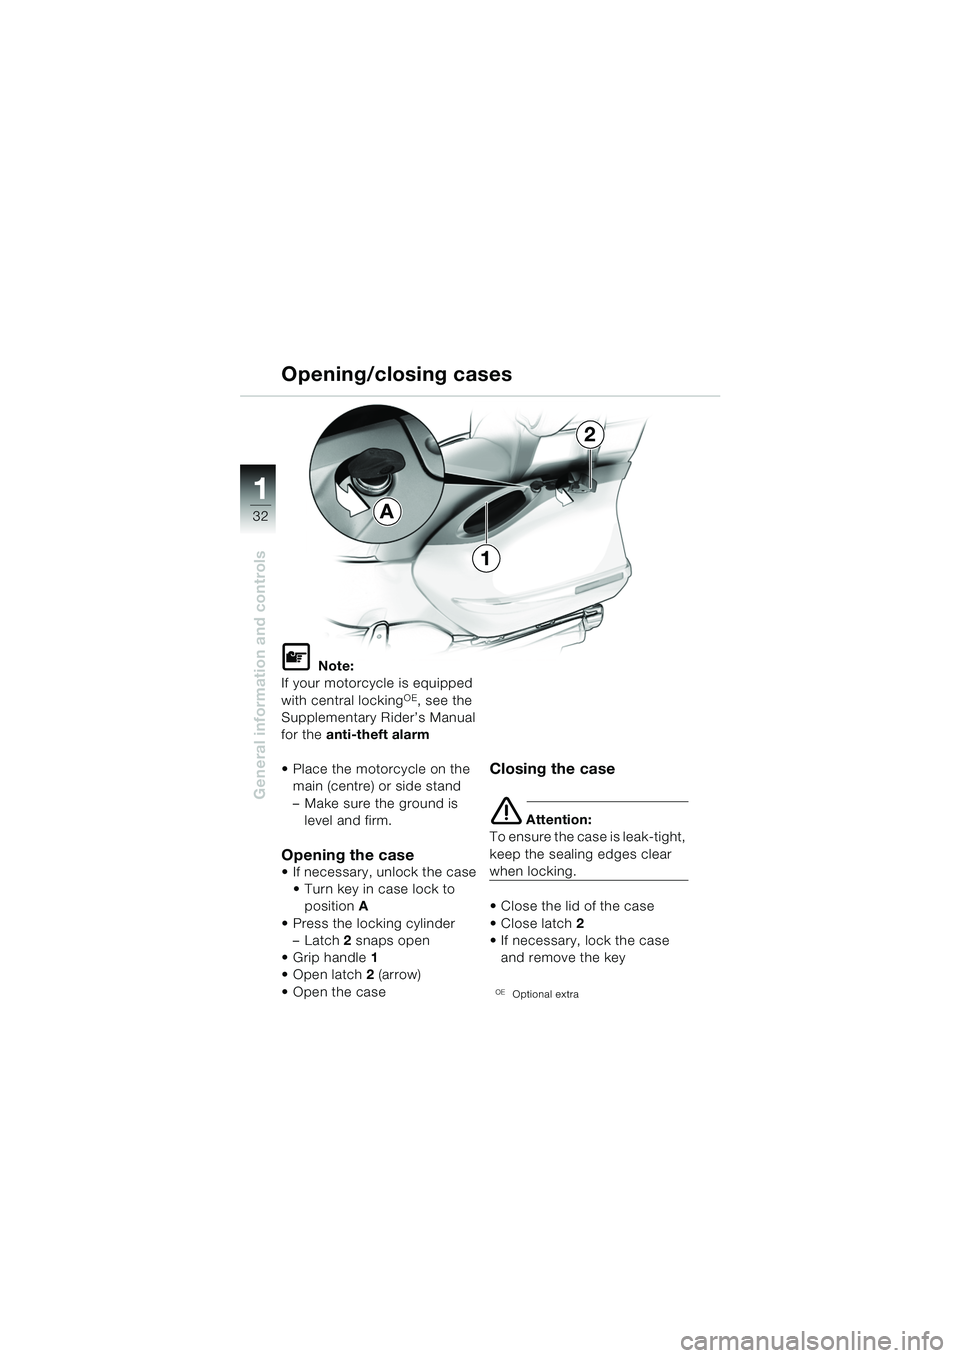 BMW MOTORRAD K 1200 LT 2005  Riders Manual (in English) 32
General information and controls
1
Opening/closing cases
L Note:
If your motorcycle is equipped 
with central locking
OE, see the 
Supplementary Rider’s Manual 
for the  anti-theft alarm
 Place 